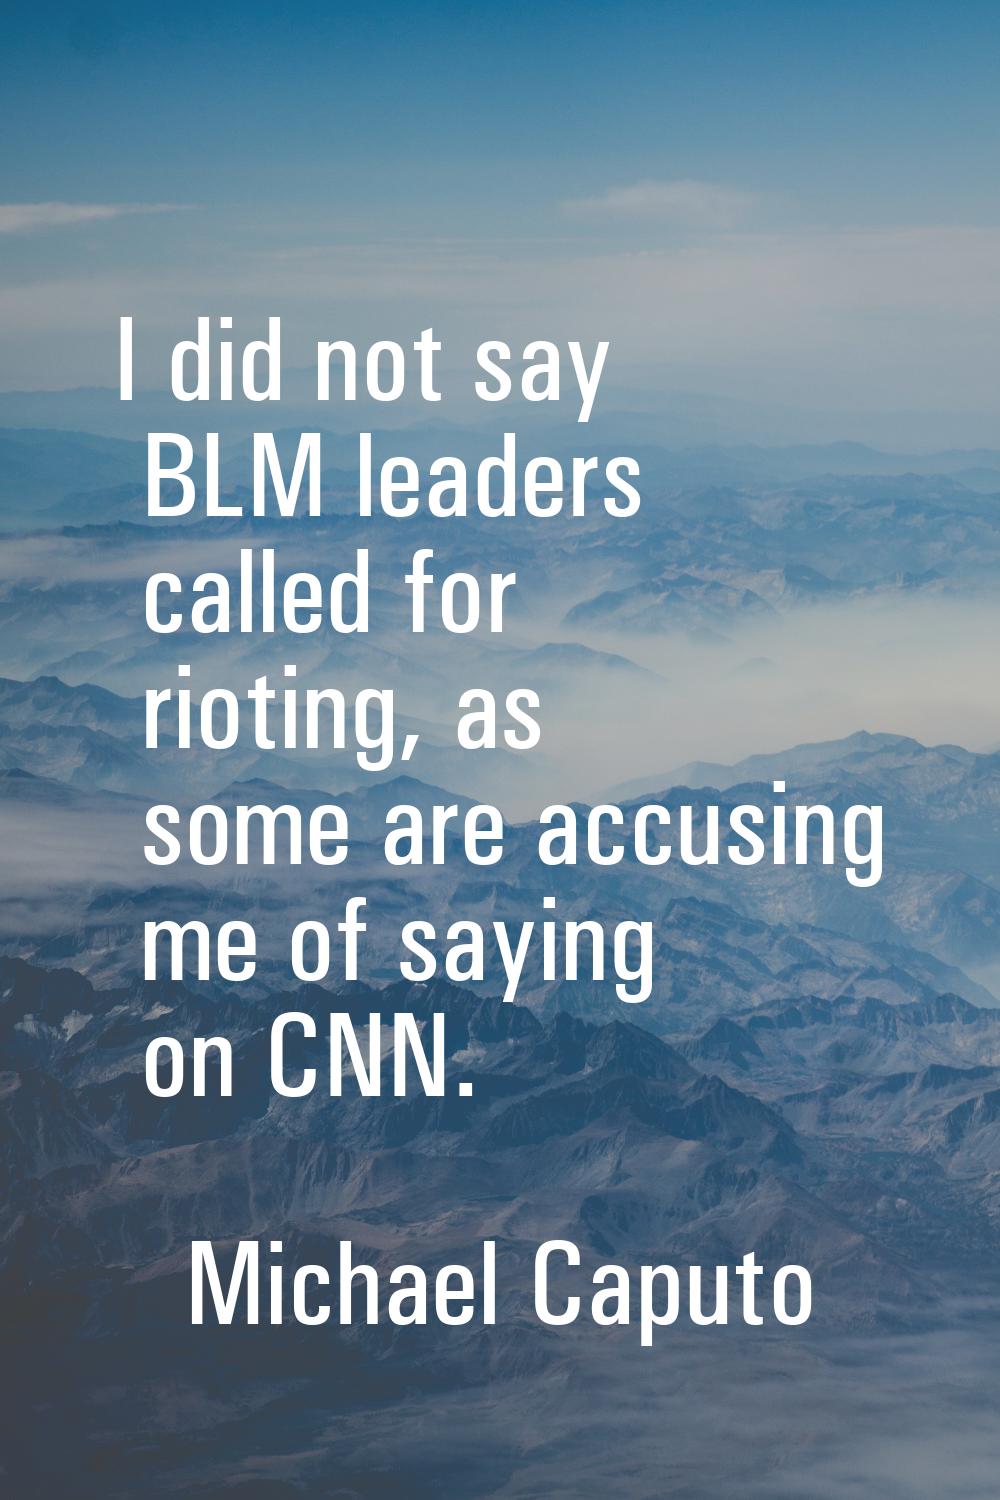 I did not say BLM leaders called for rioting, as some are accusing me of saying on CNN.